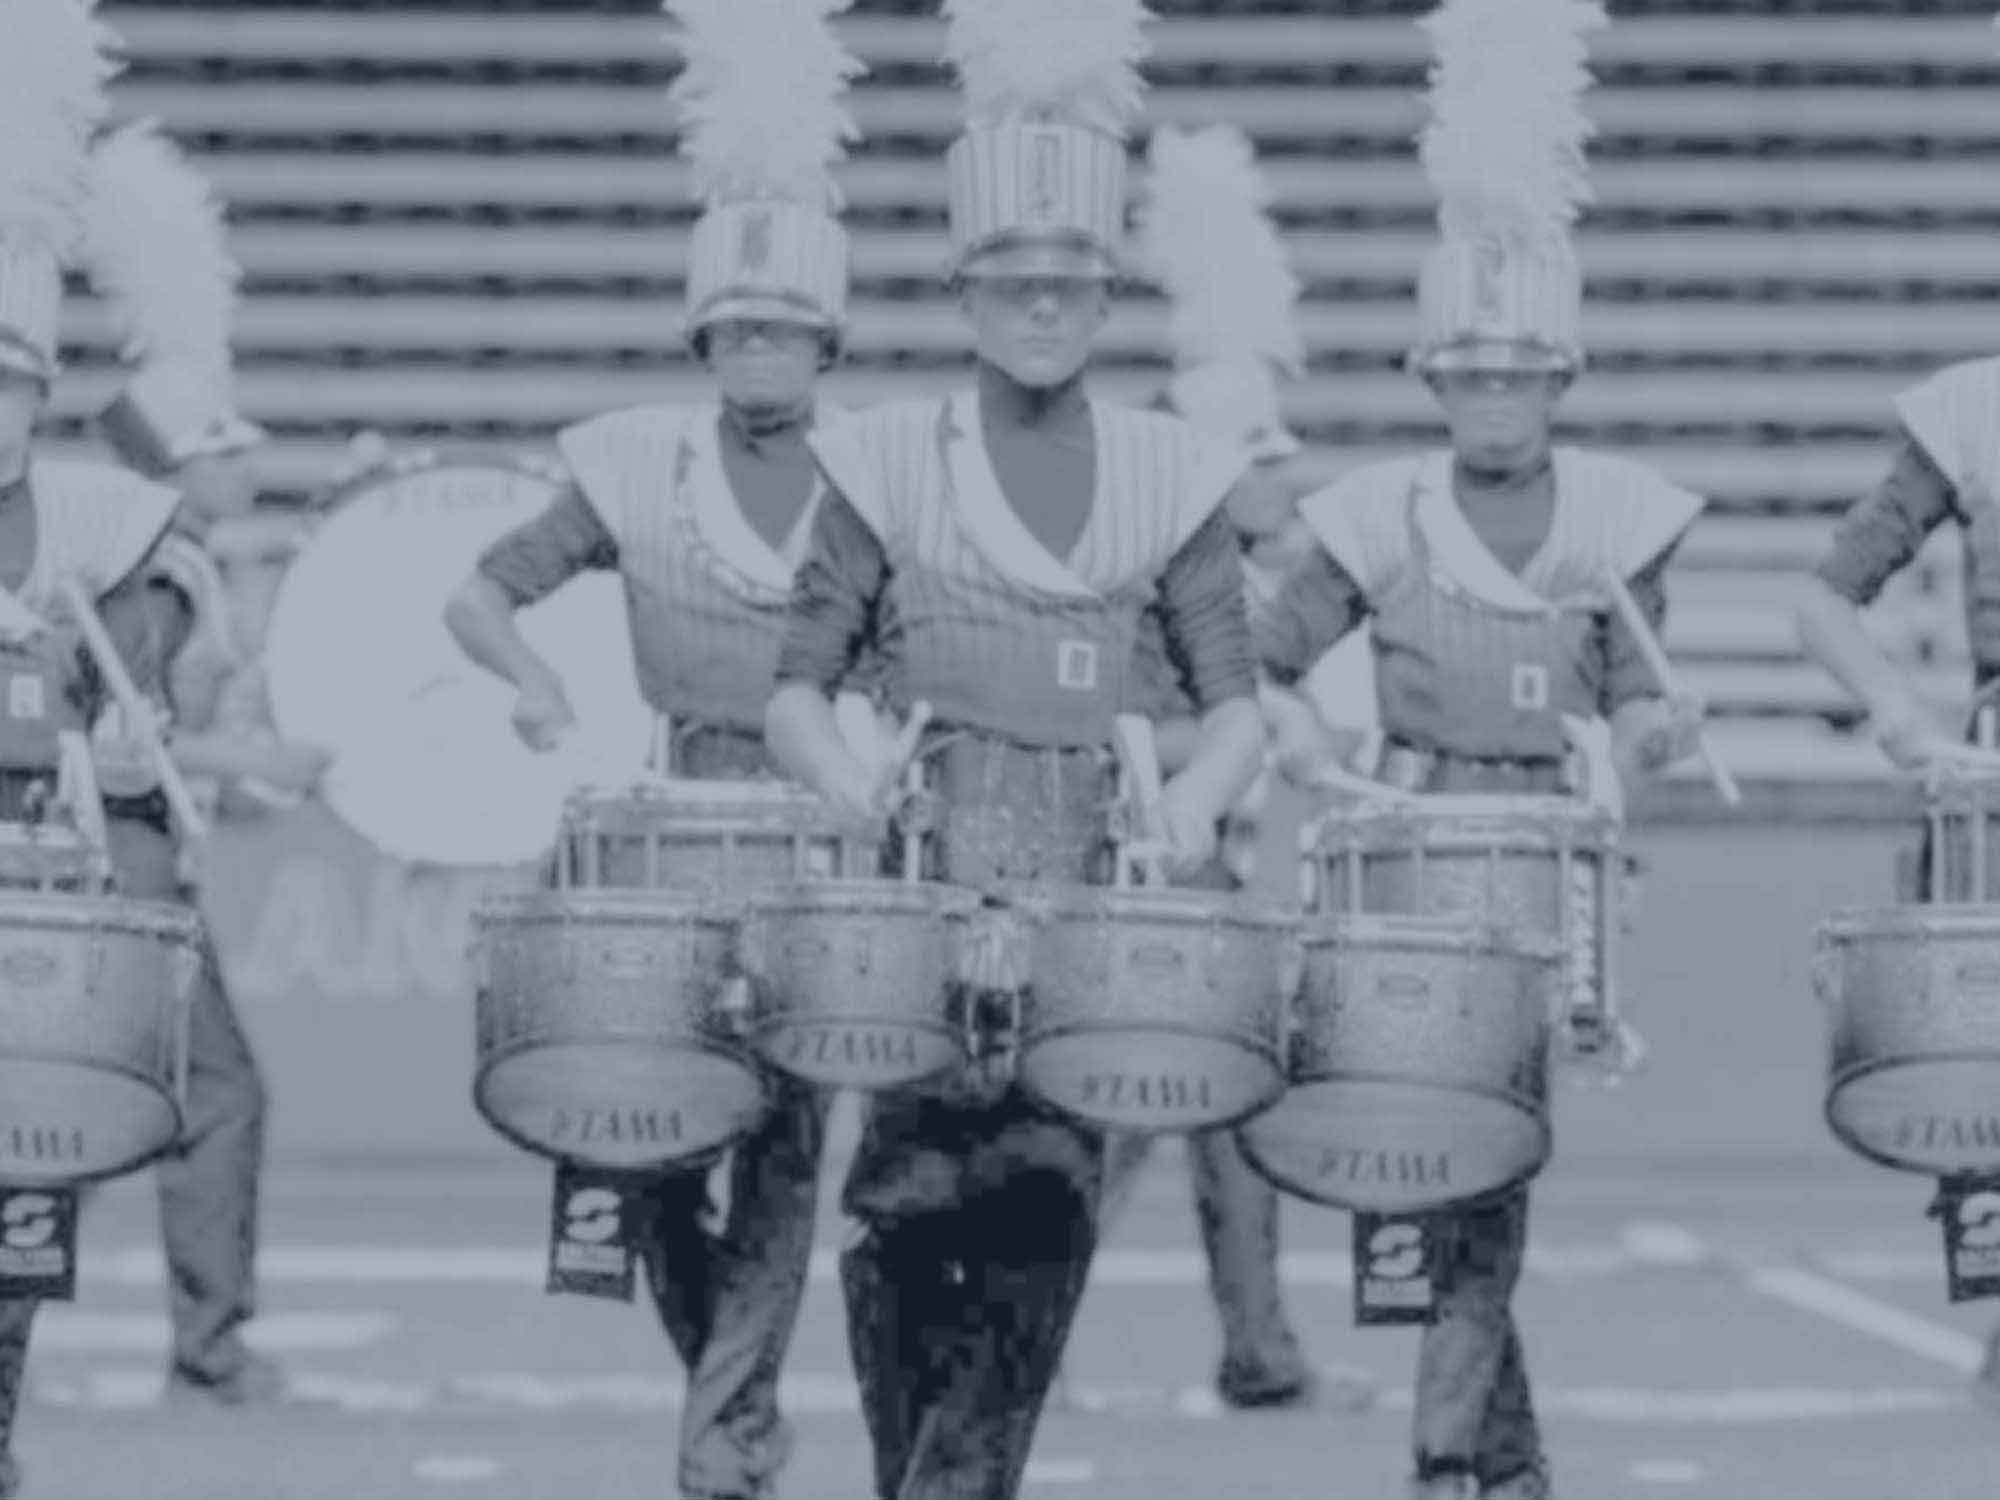 Contact lists – what works for crowdfunding and marching band fundraising?